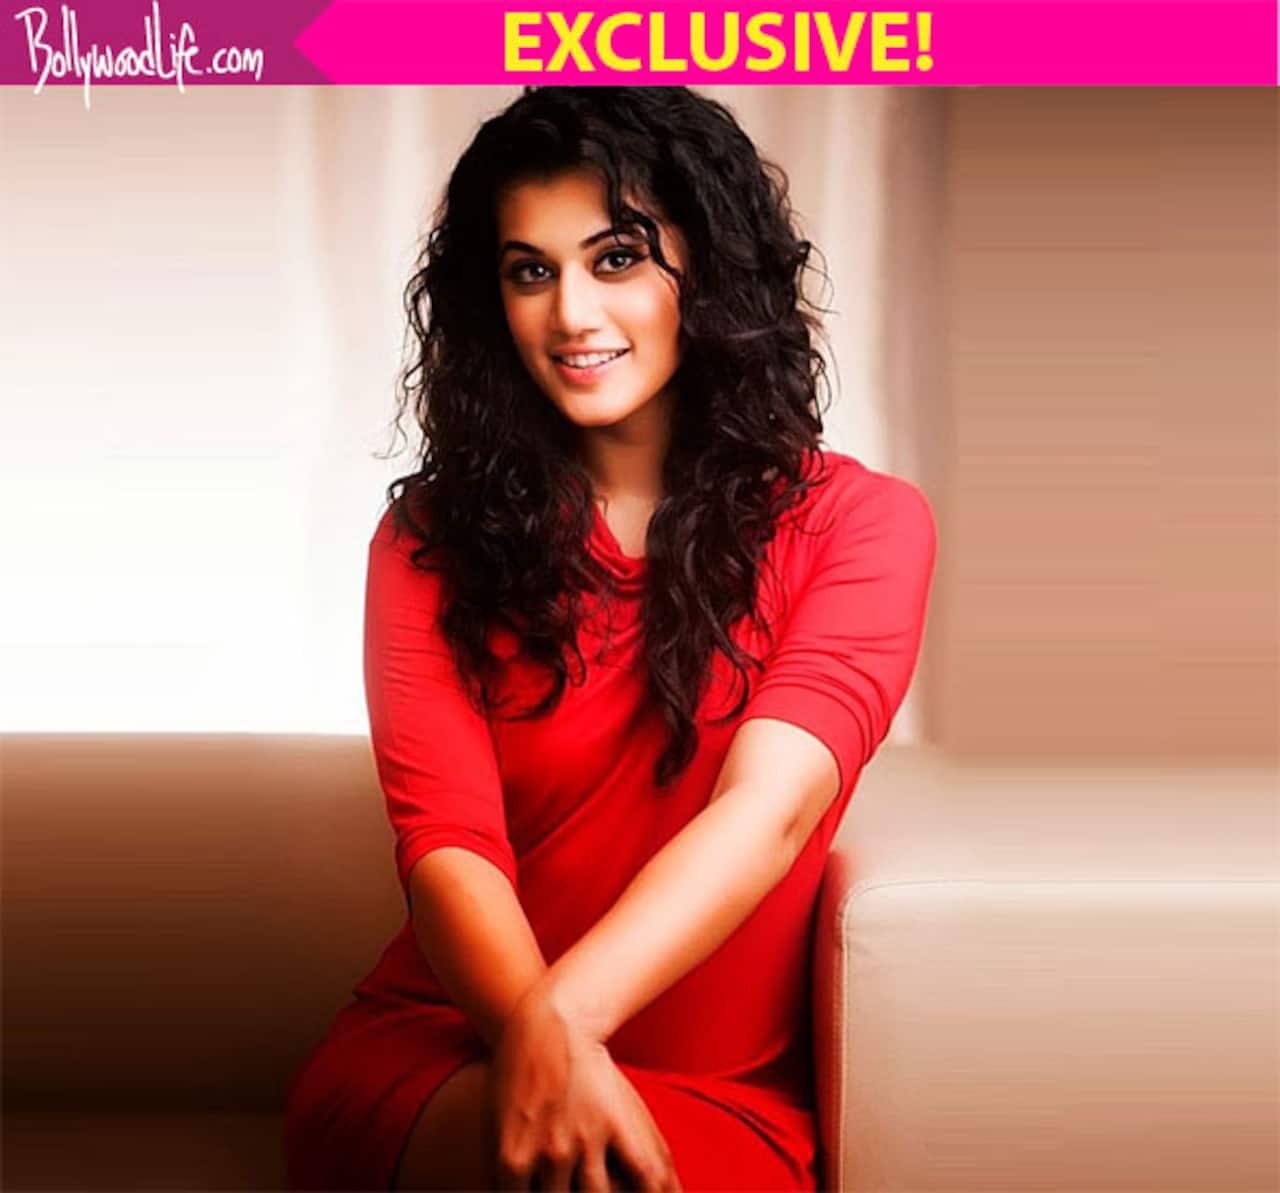 Amitabh Bachchan's open letter to Navya was NOT a publicity gimmick - Taapsee Pannu in an EXCLUSIVE interview!